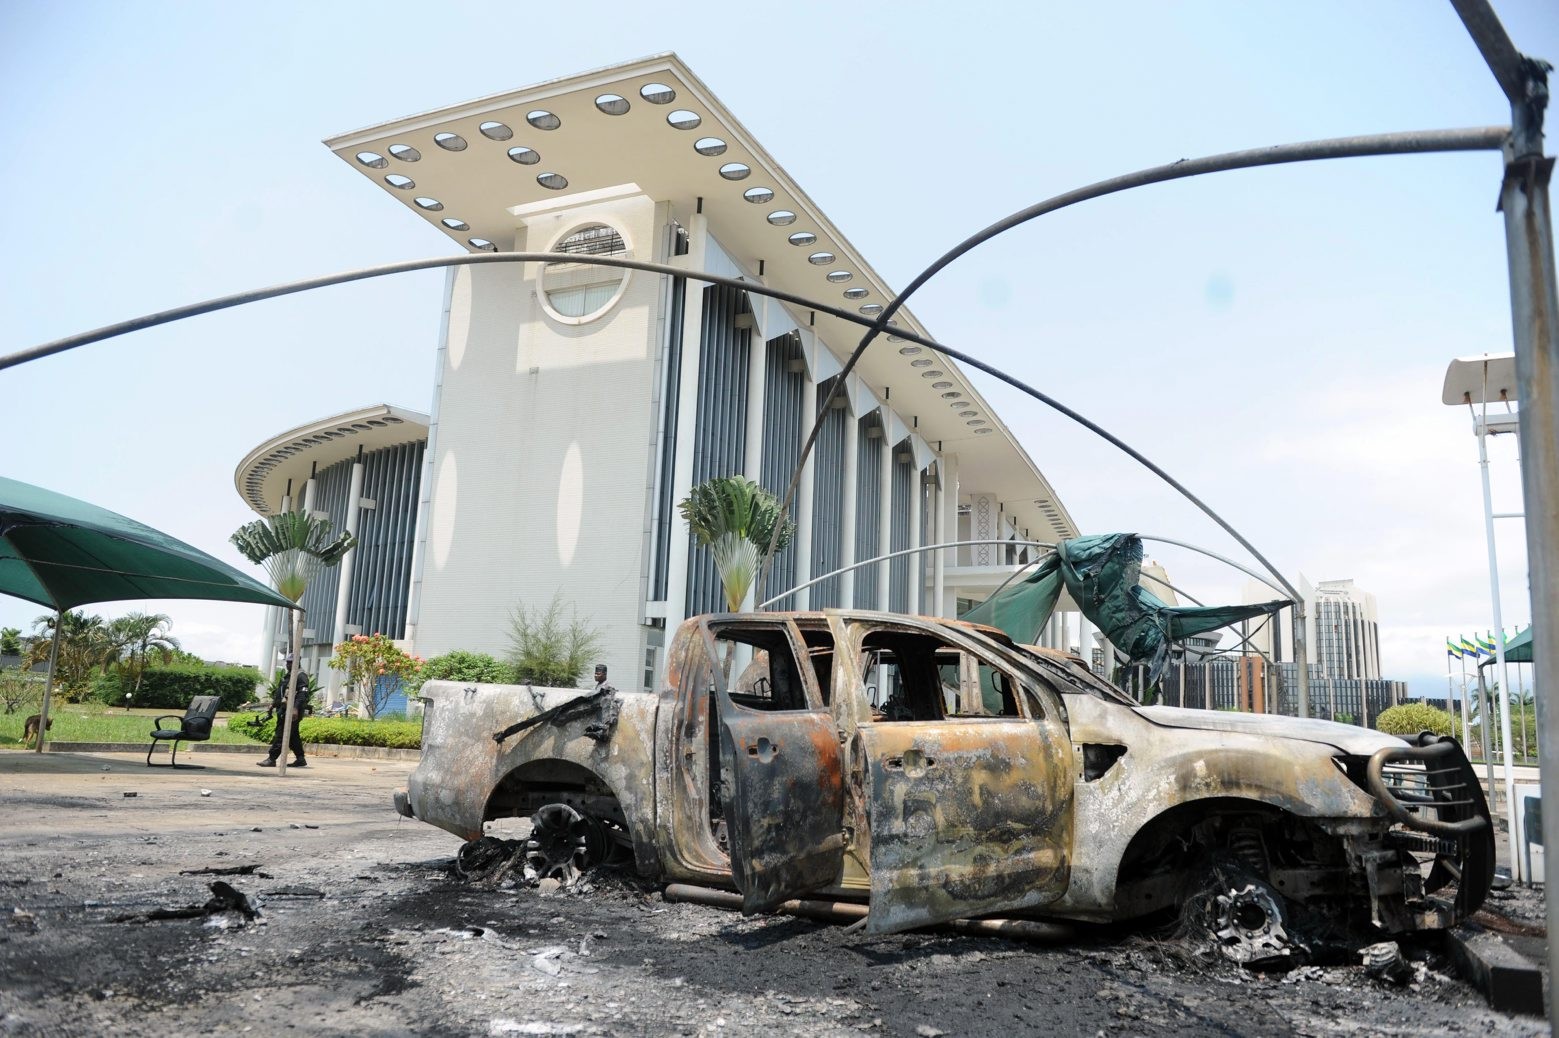 A burned vehicle sits outside a government building after an election protest in Libreville, Gabon, Thursday Sept. 1, 2016. Gabon's newly re-elected president sought to assert authority Thursday as the presidential guard attacked the opposition candidate's party headquarters overnight, killing at least one person and injuring more than a dozen amid fiery protests that have seen hundreds detained and the internet blocked. (AP Photo/Joel Bouopda) Pictures Of The Week Photo Gallery